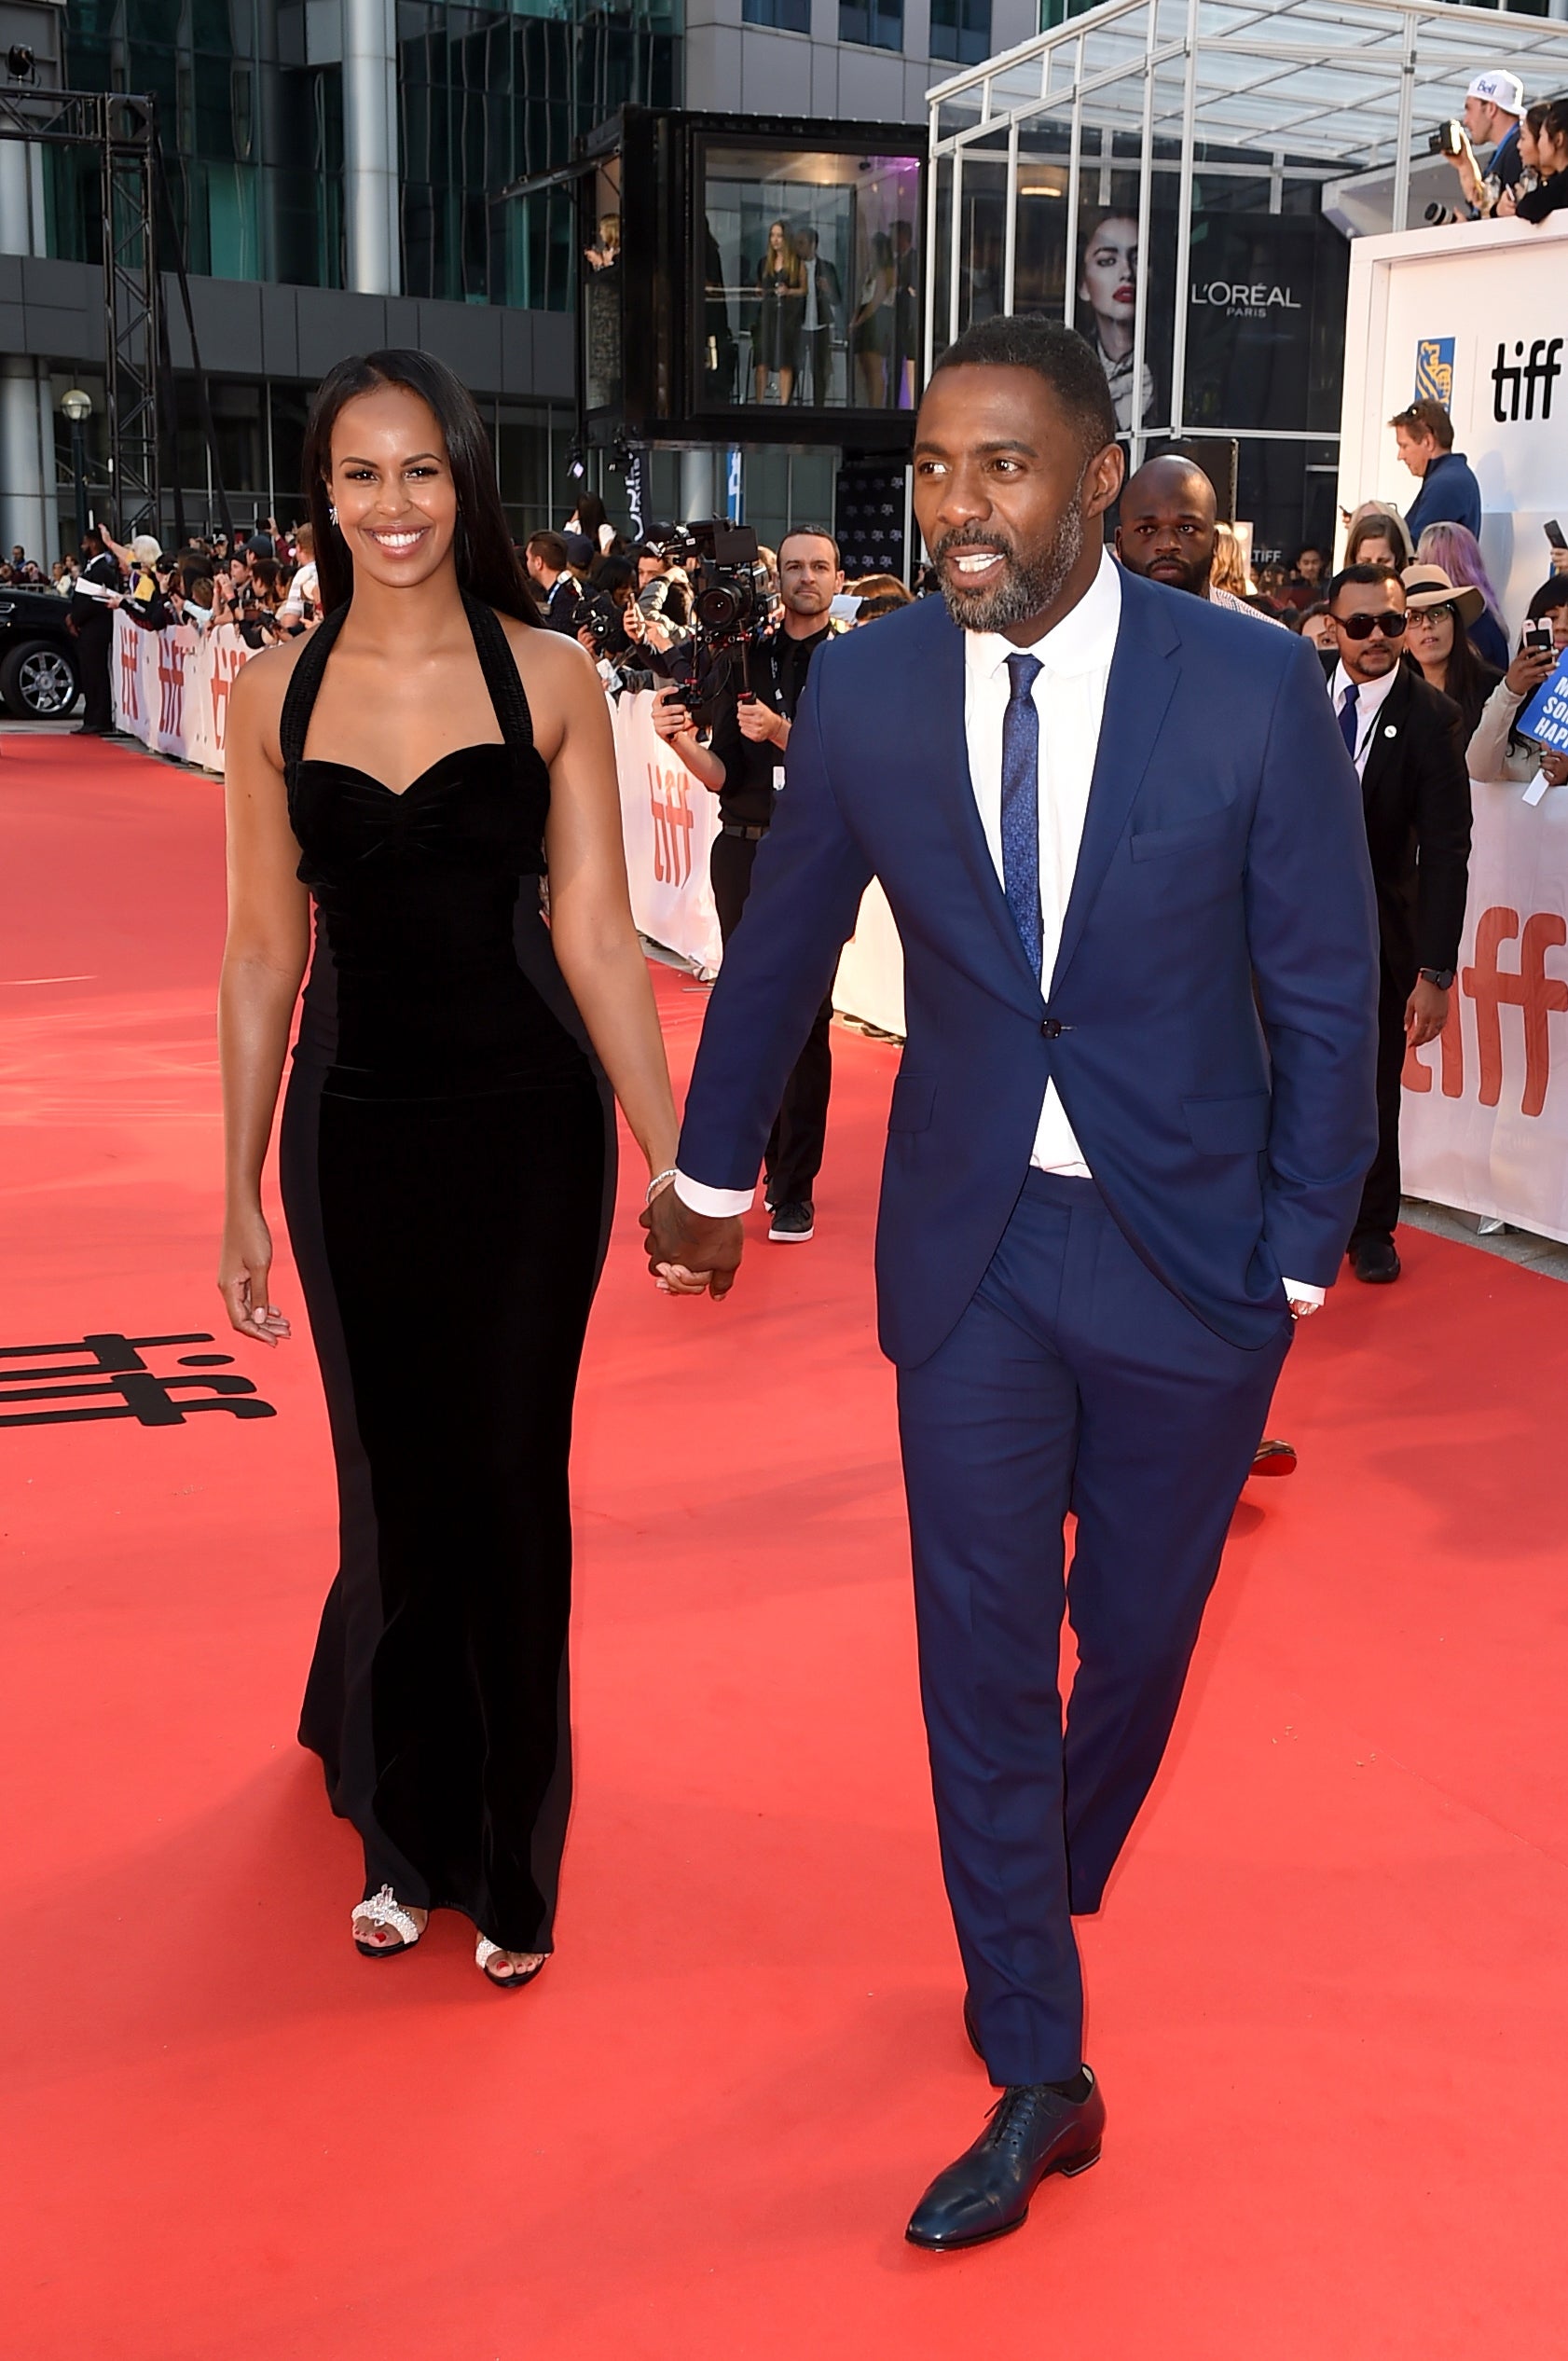 12 Cute Photos Of Idris Elba And His Fiancée Sabrina Dhowre That Say It All
